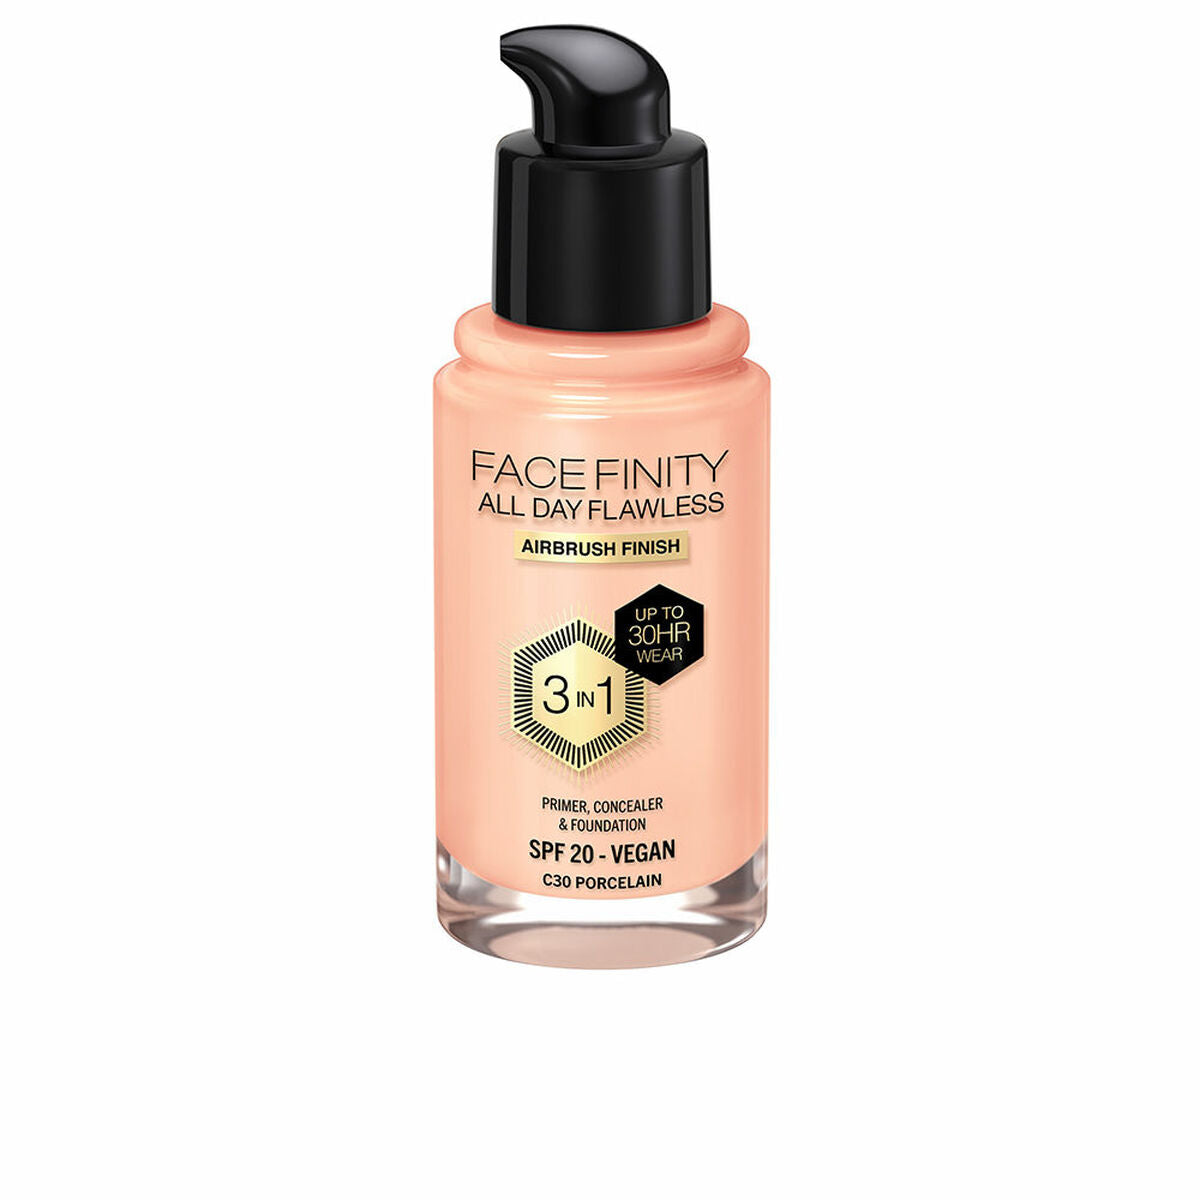 Crème Make-up Base Max Factor Face Finity All Day Flawless 3-in-1 Spf 20 Nº C30 Porcelain 30 ml-0